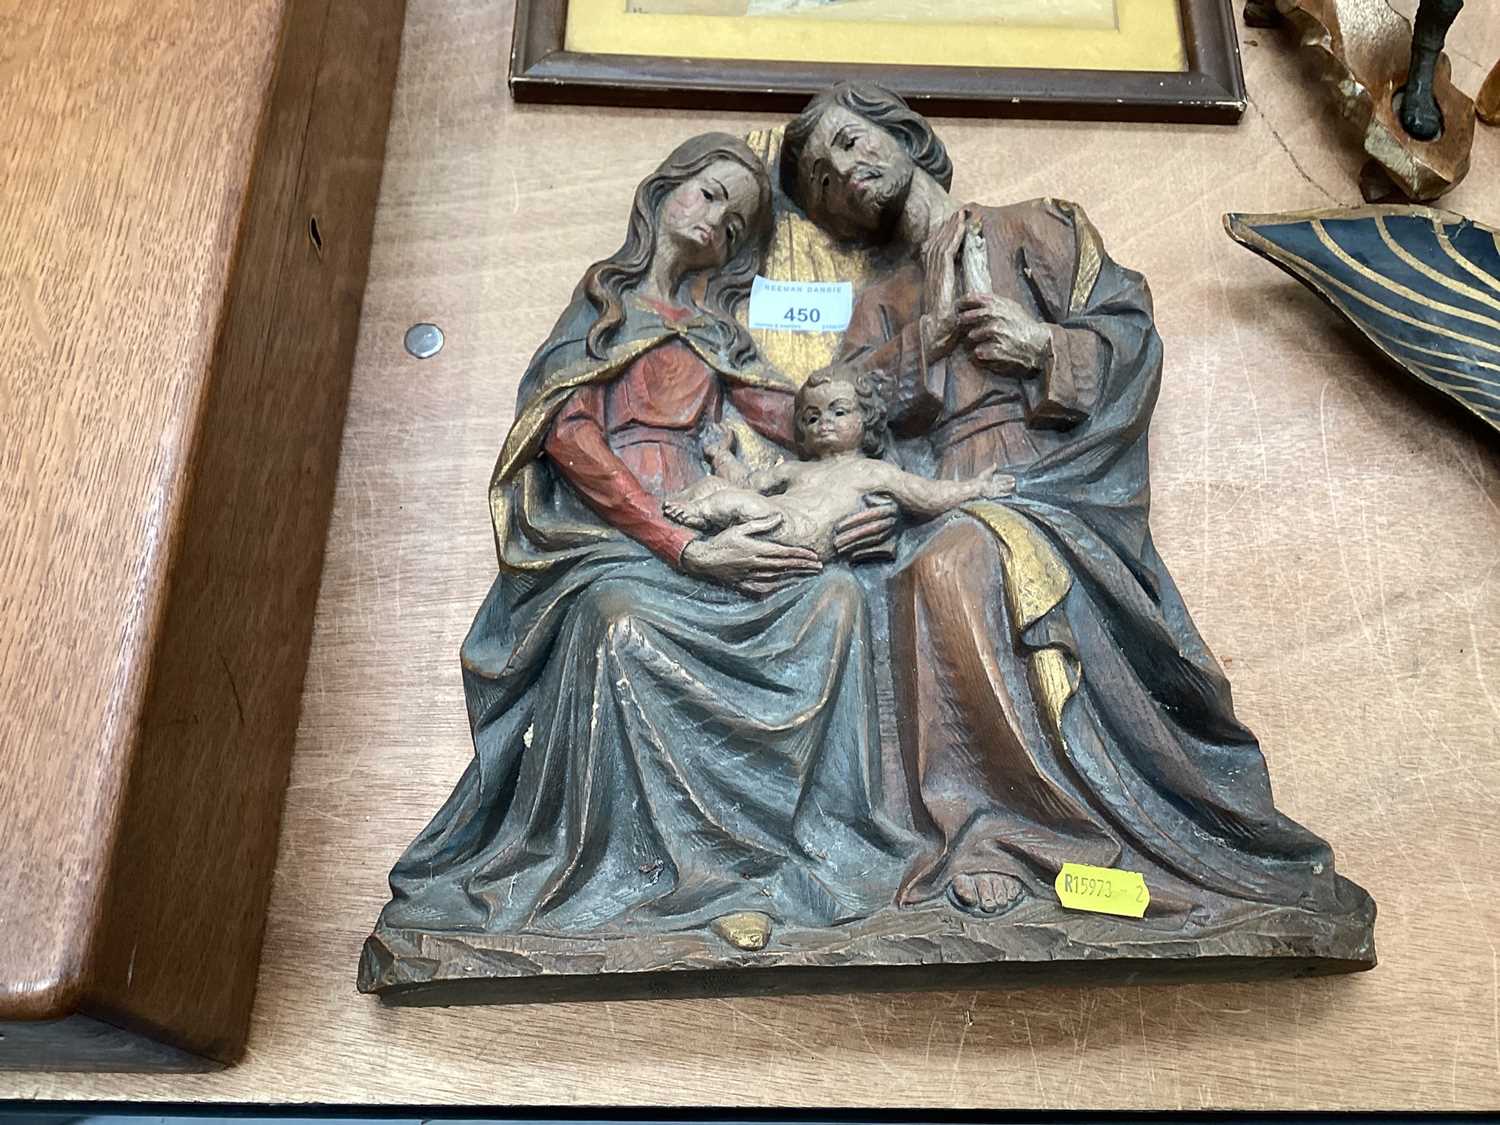 Carved oak religious scene depicting an infant Jesus wit Mary and Joseph.